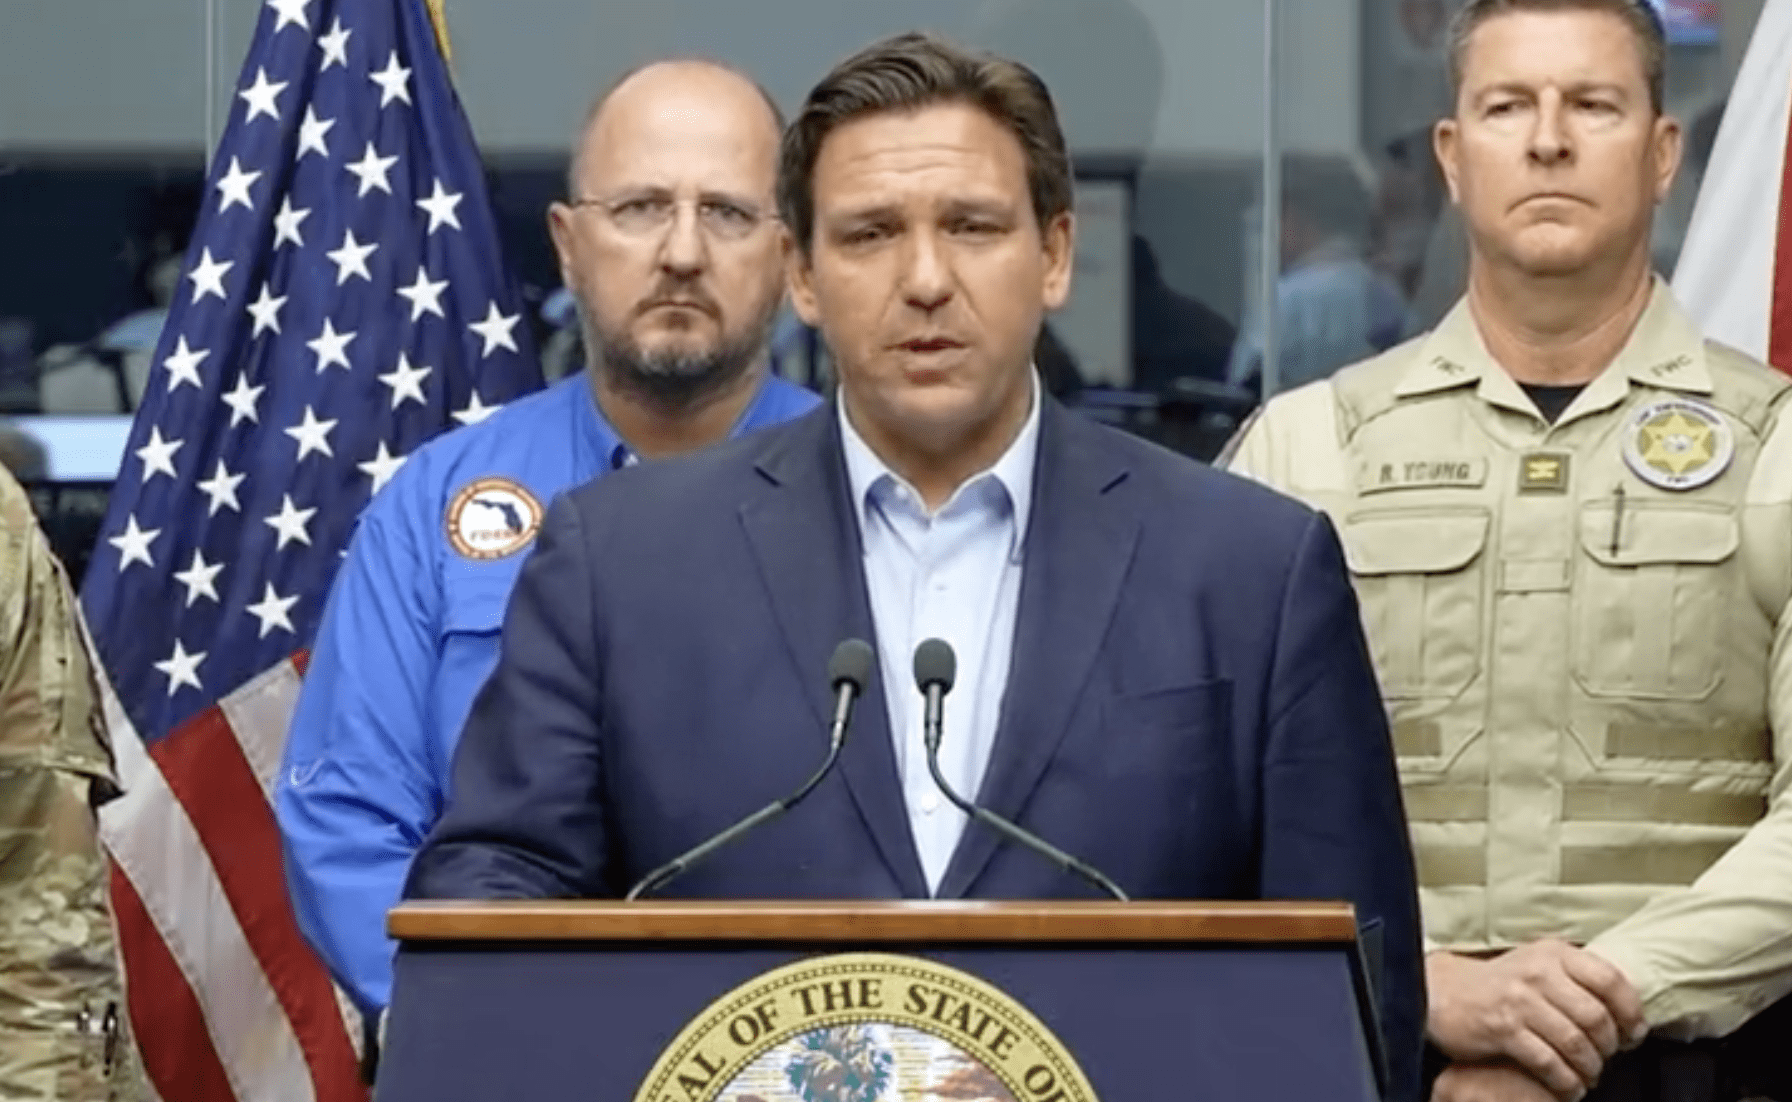 desantis-gives-special-shout-out-to-3-governors-who-helped-respond-to-hurricane,-including-1-democrat